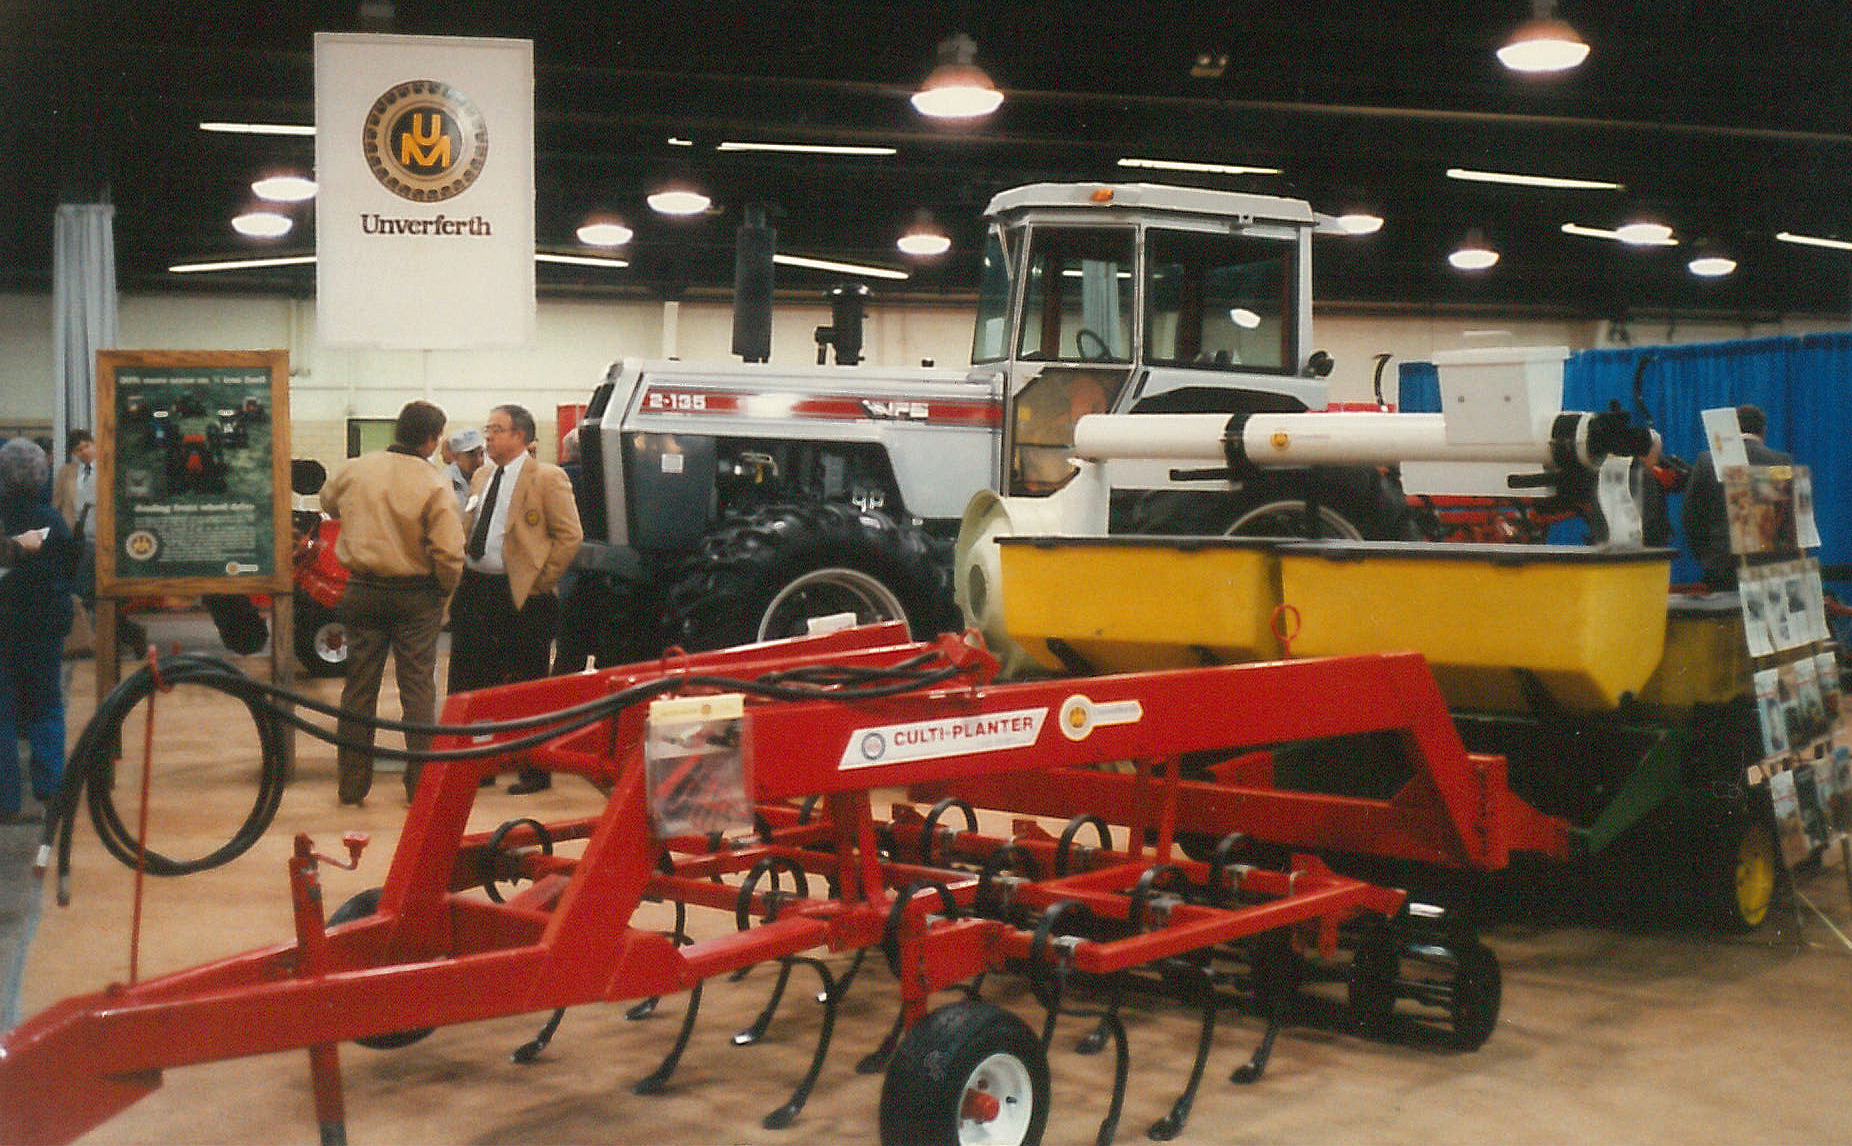 Unverferth Enters the Tillage Market with the Popular Products like the Culti-Planter